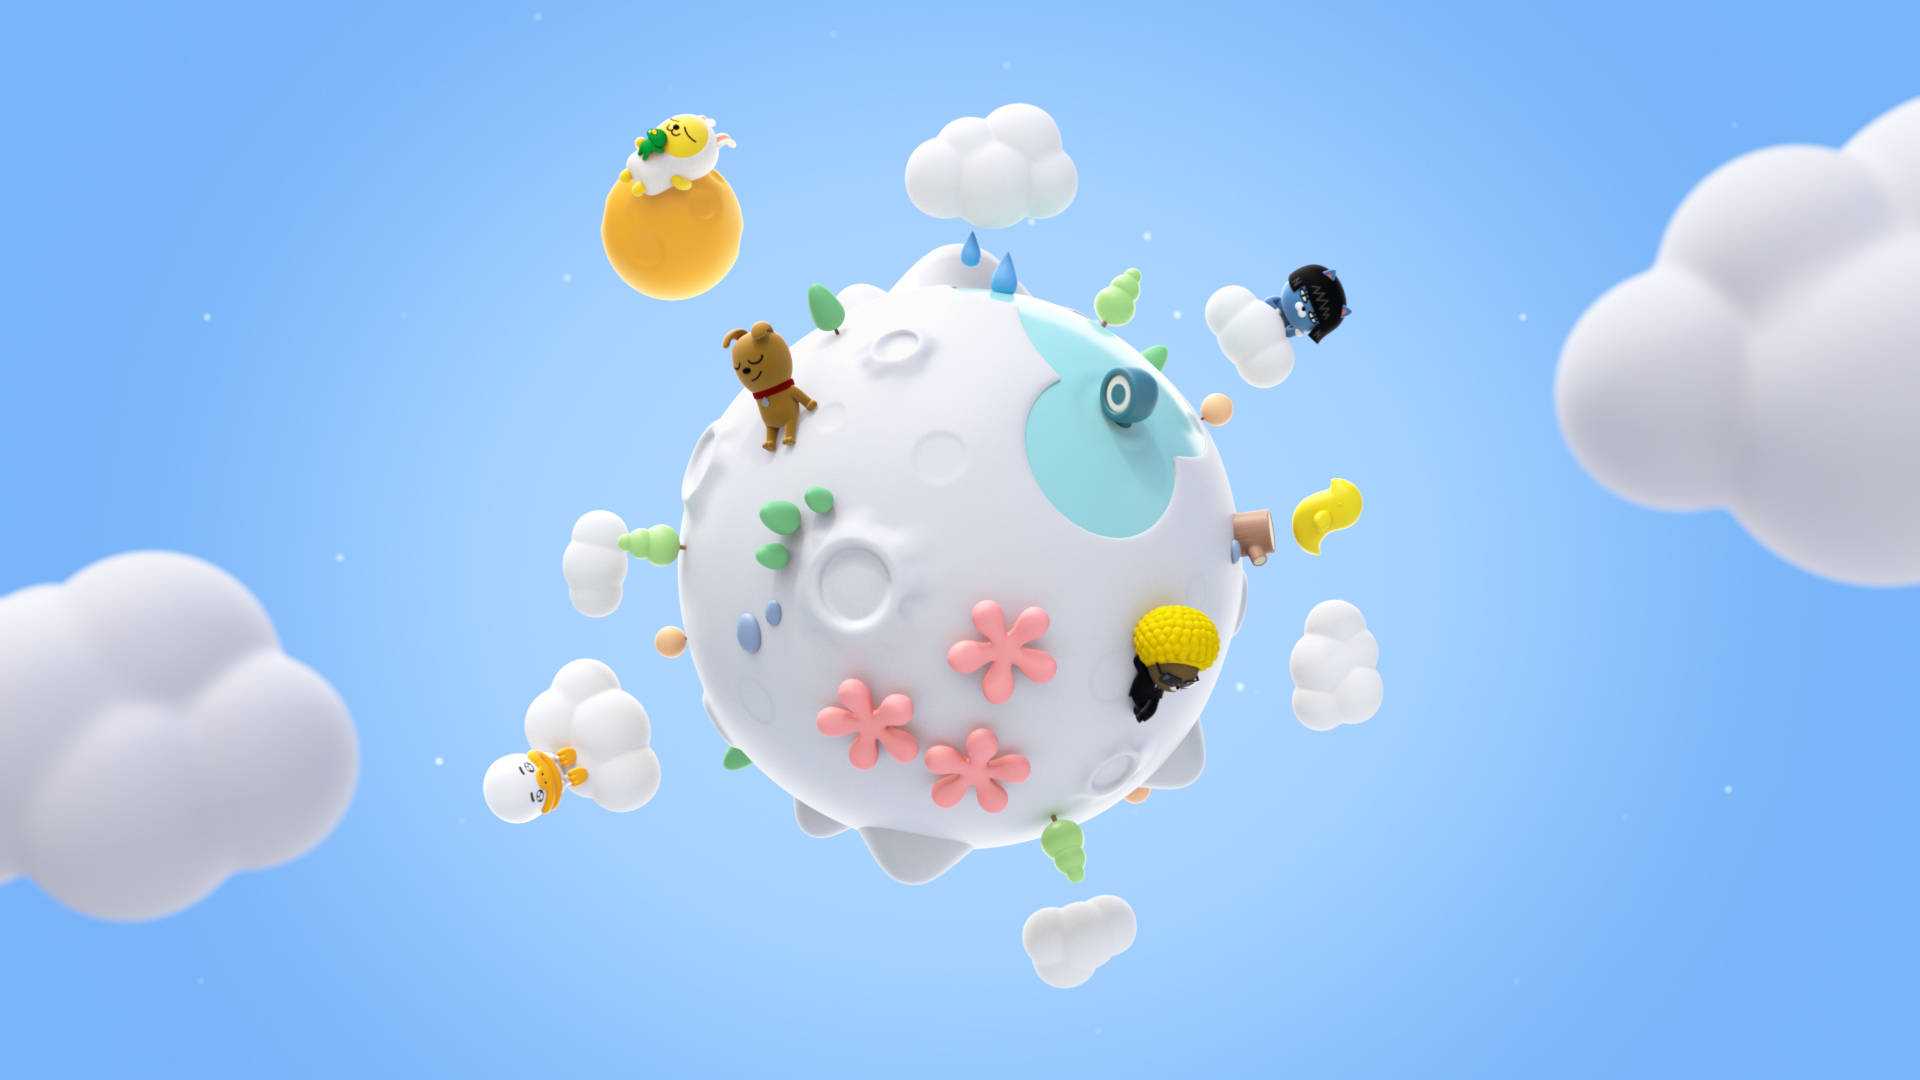 These Kakao Friends Are Enjoying A Magical Adventure In The Clouds Background